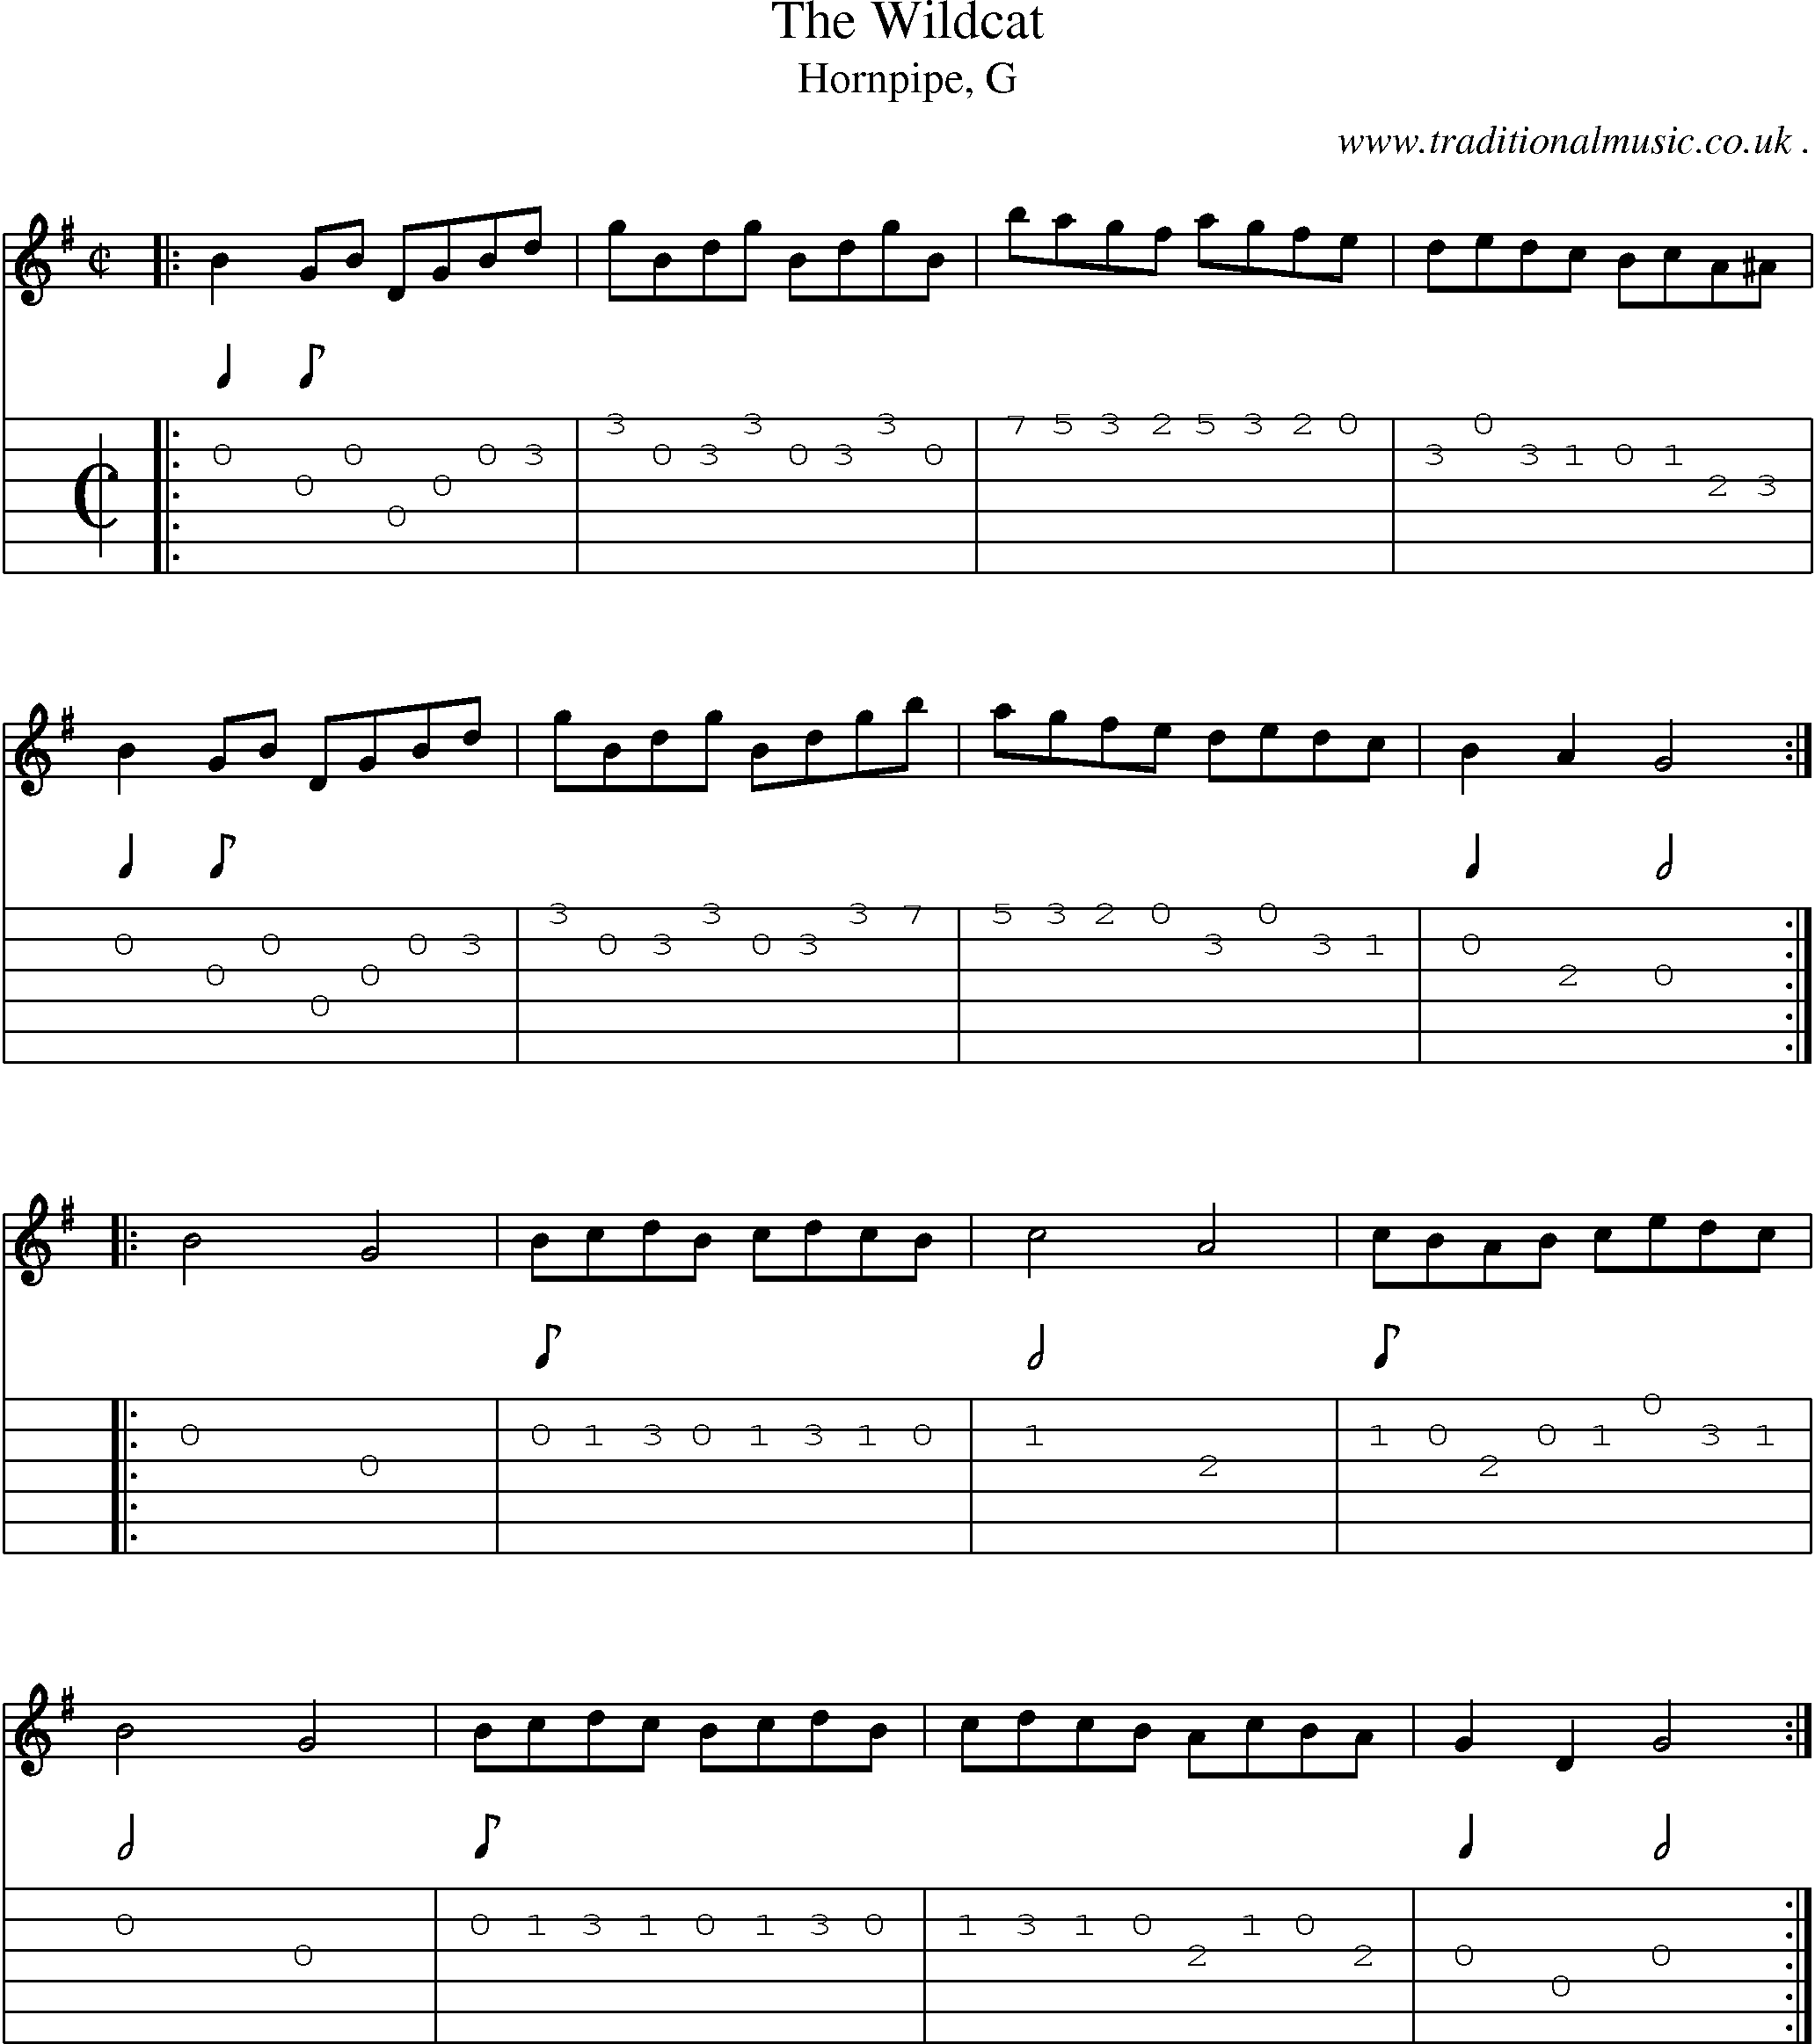 Sheet-music  score, Chords and Guitar Tabs for The Wildcat